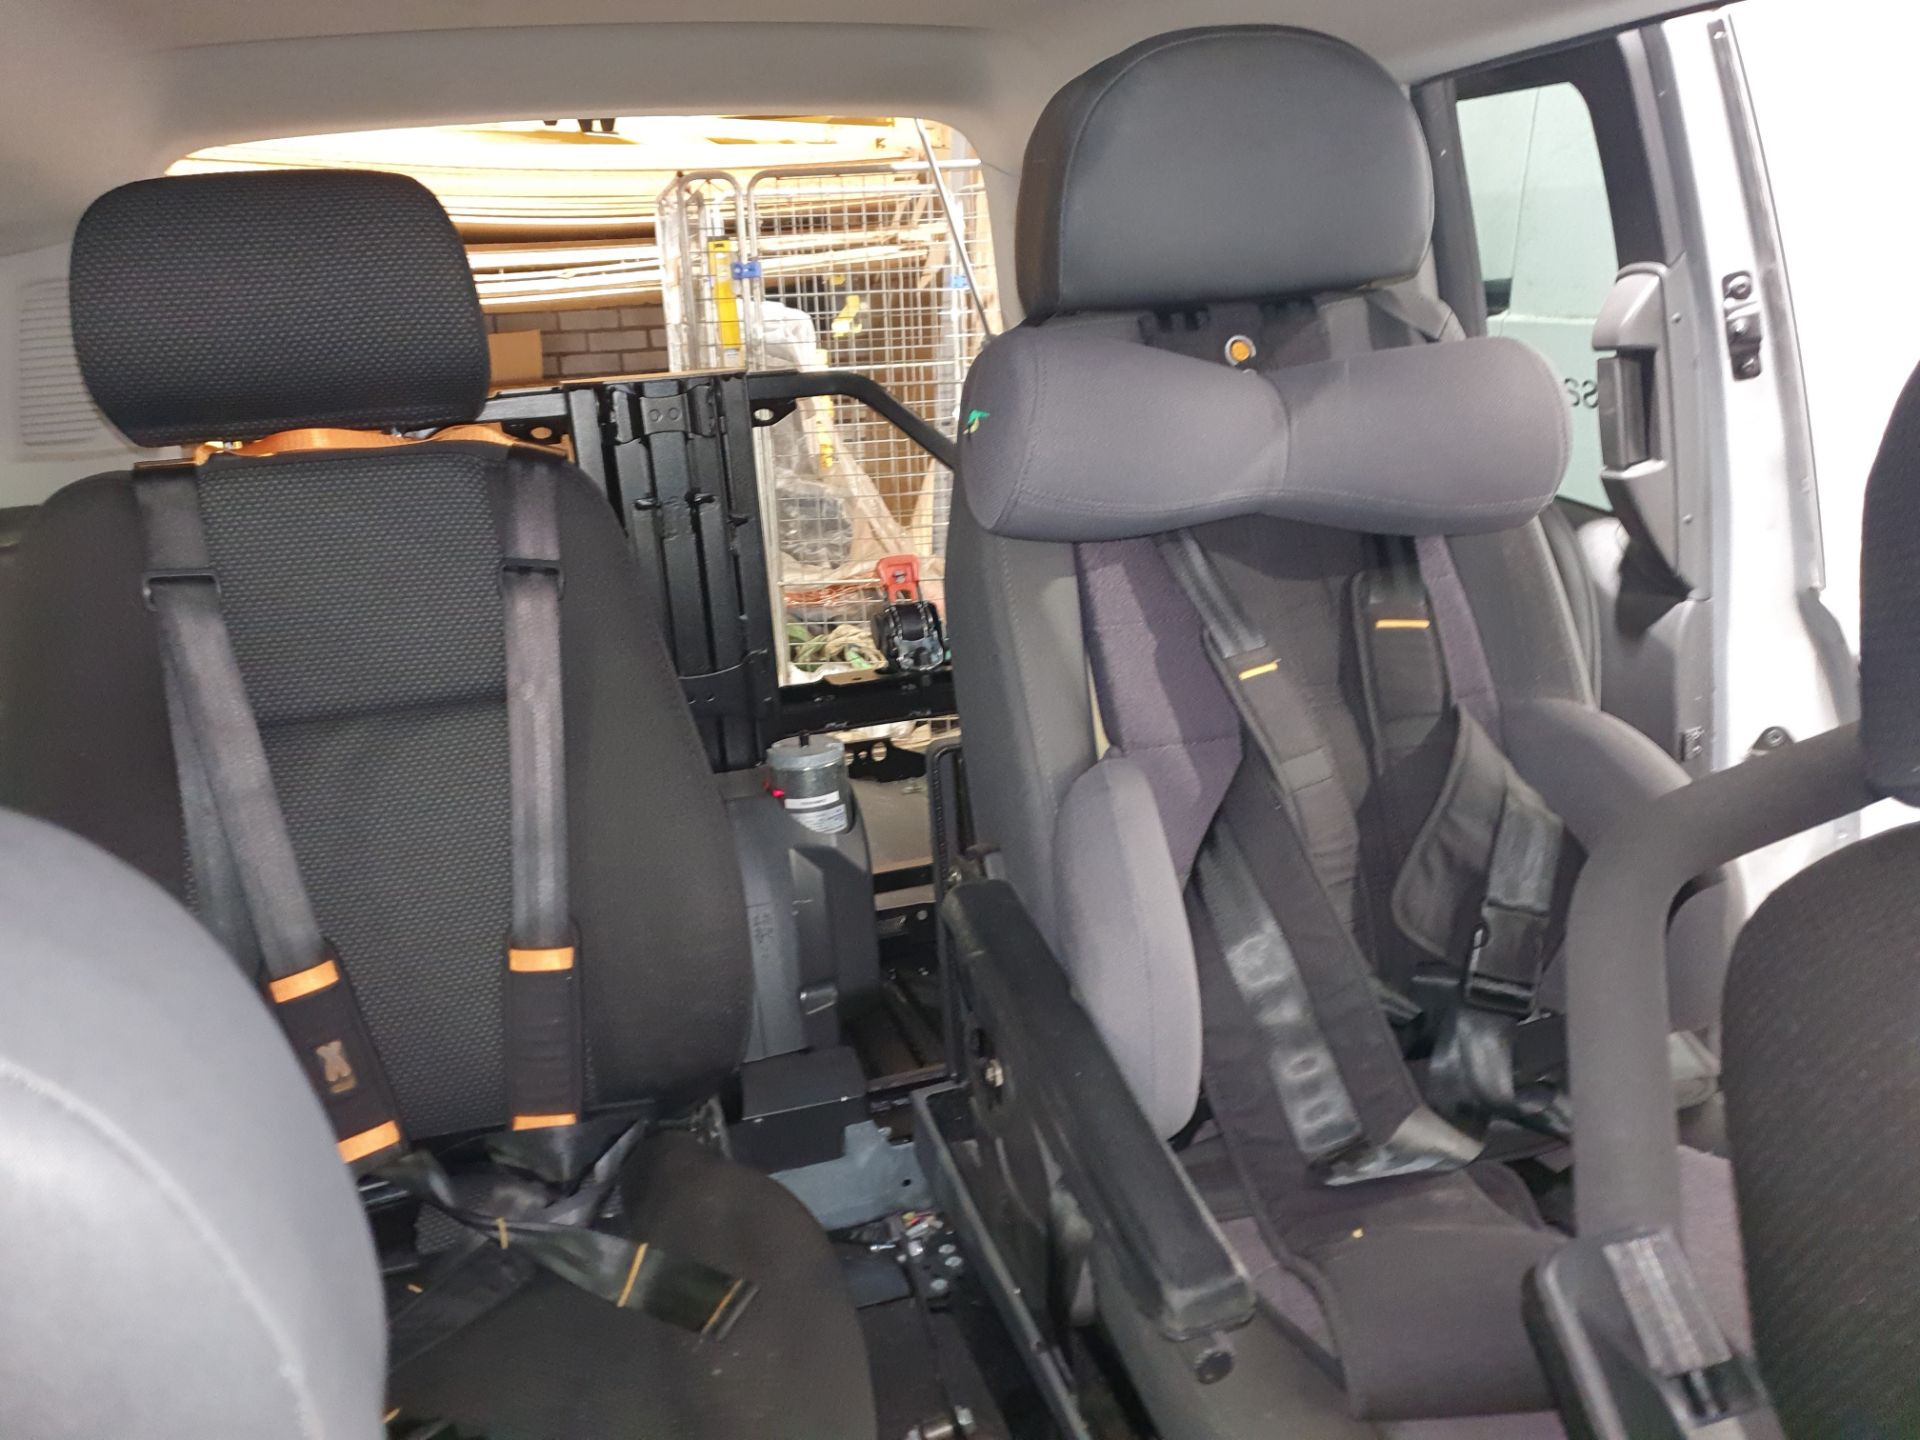 Ford Grand Tourneo Connect | AE66 WLD | Silver | Automatic | 121,125 Miles | Ricon Wheelchair Lift - Image 28 of 33